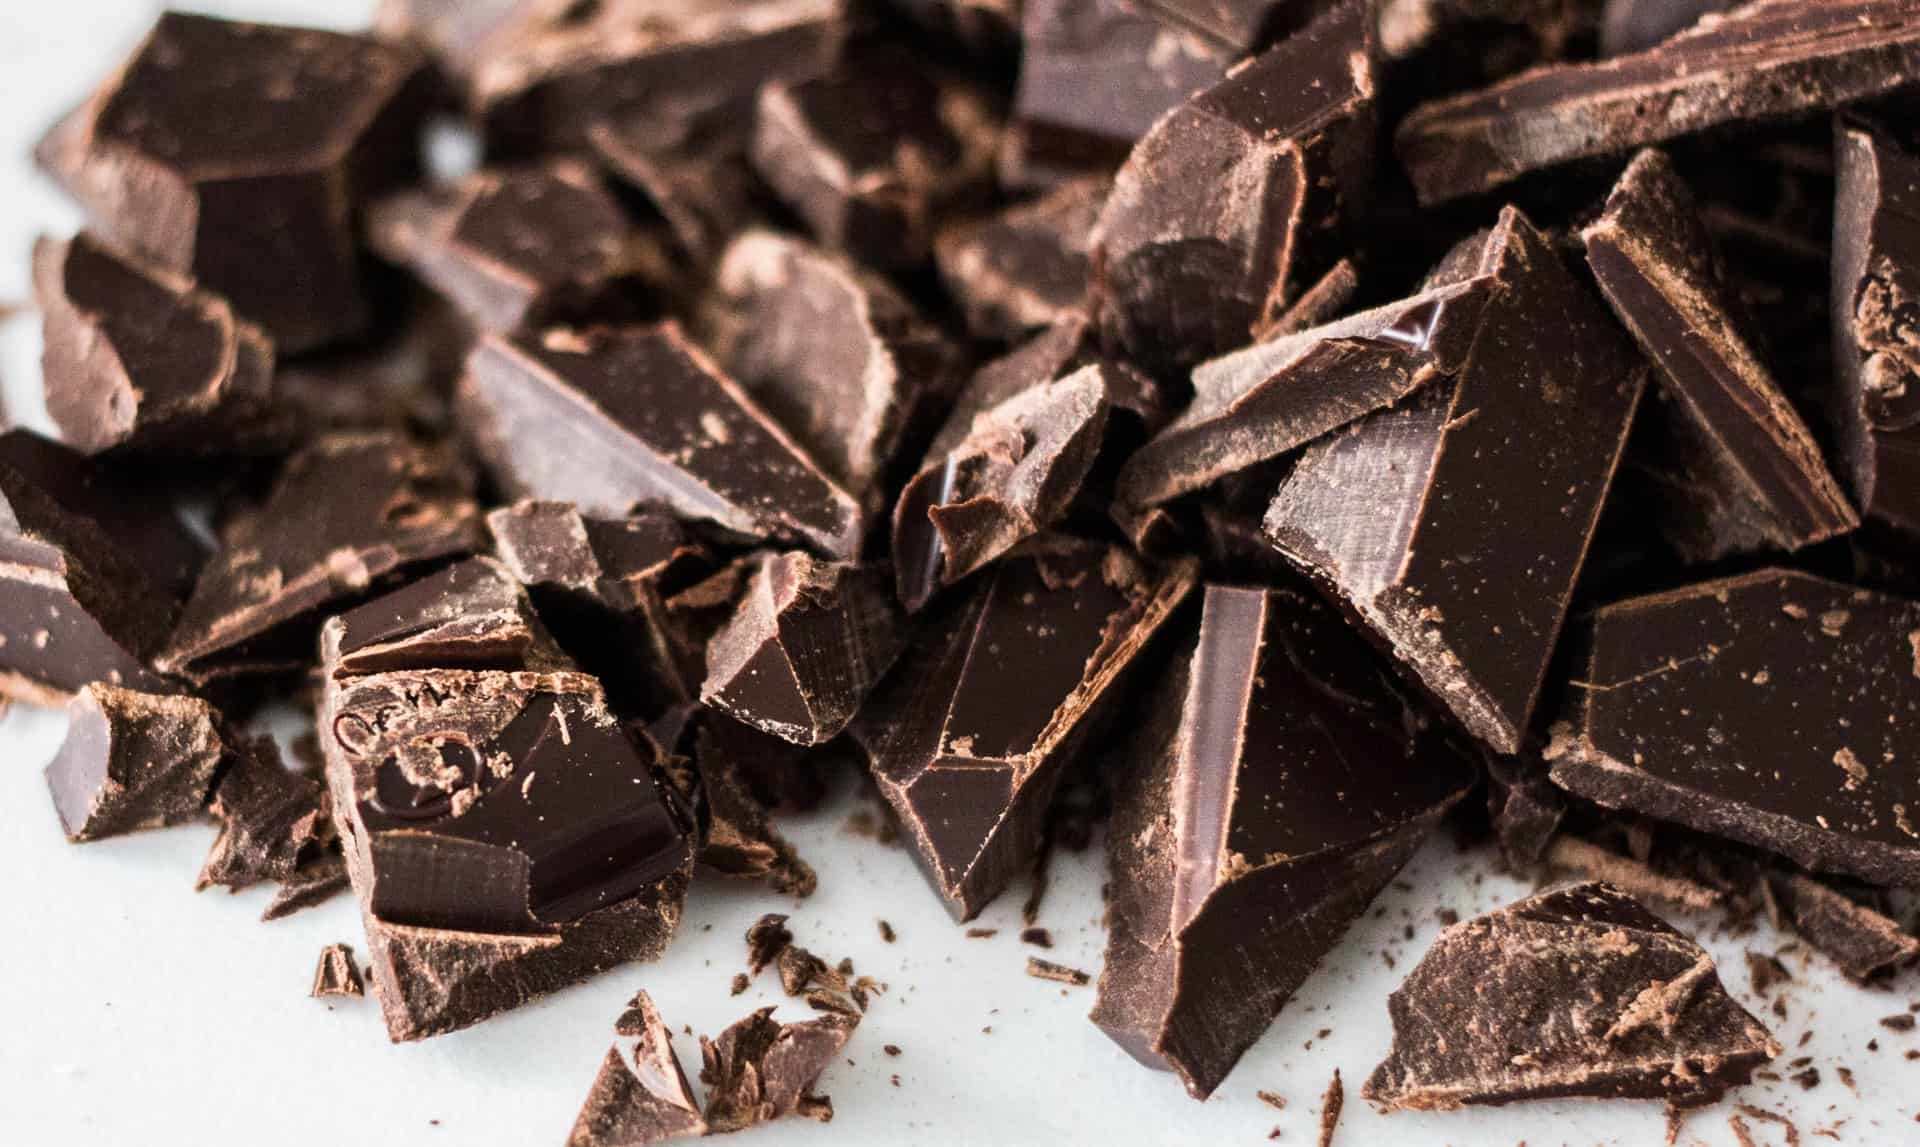 Shards of dark chocolate on a table